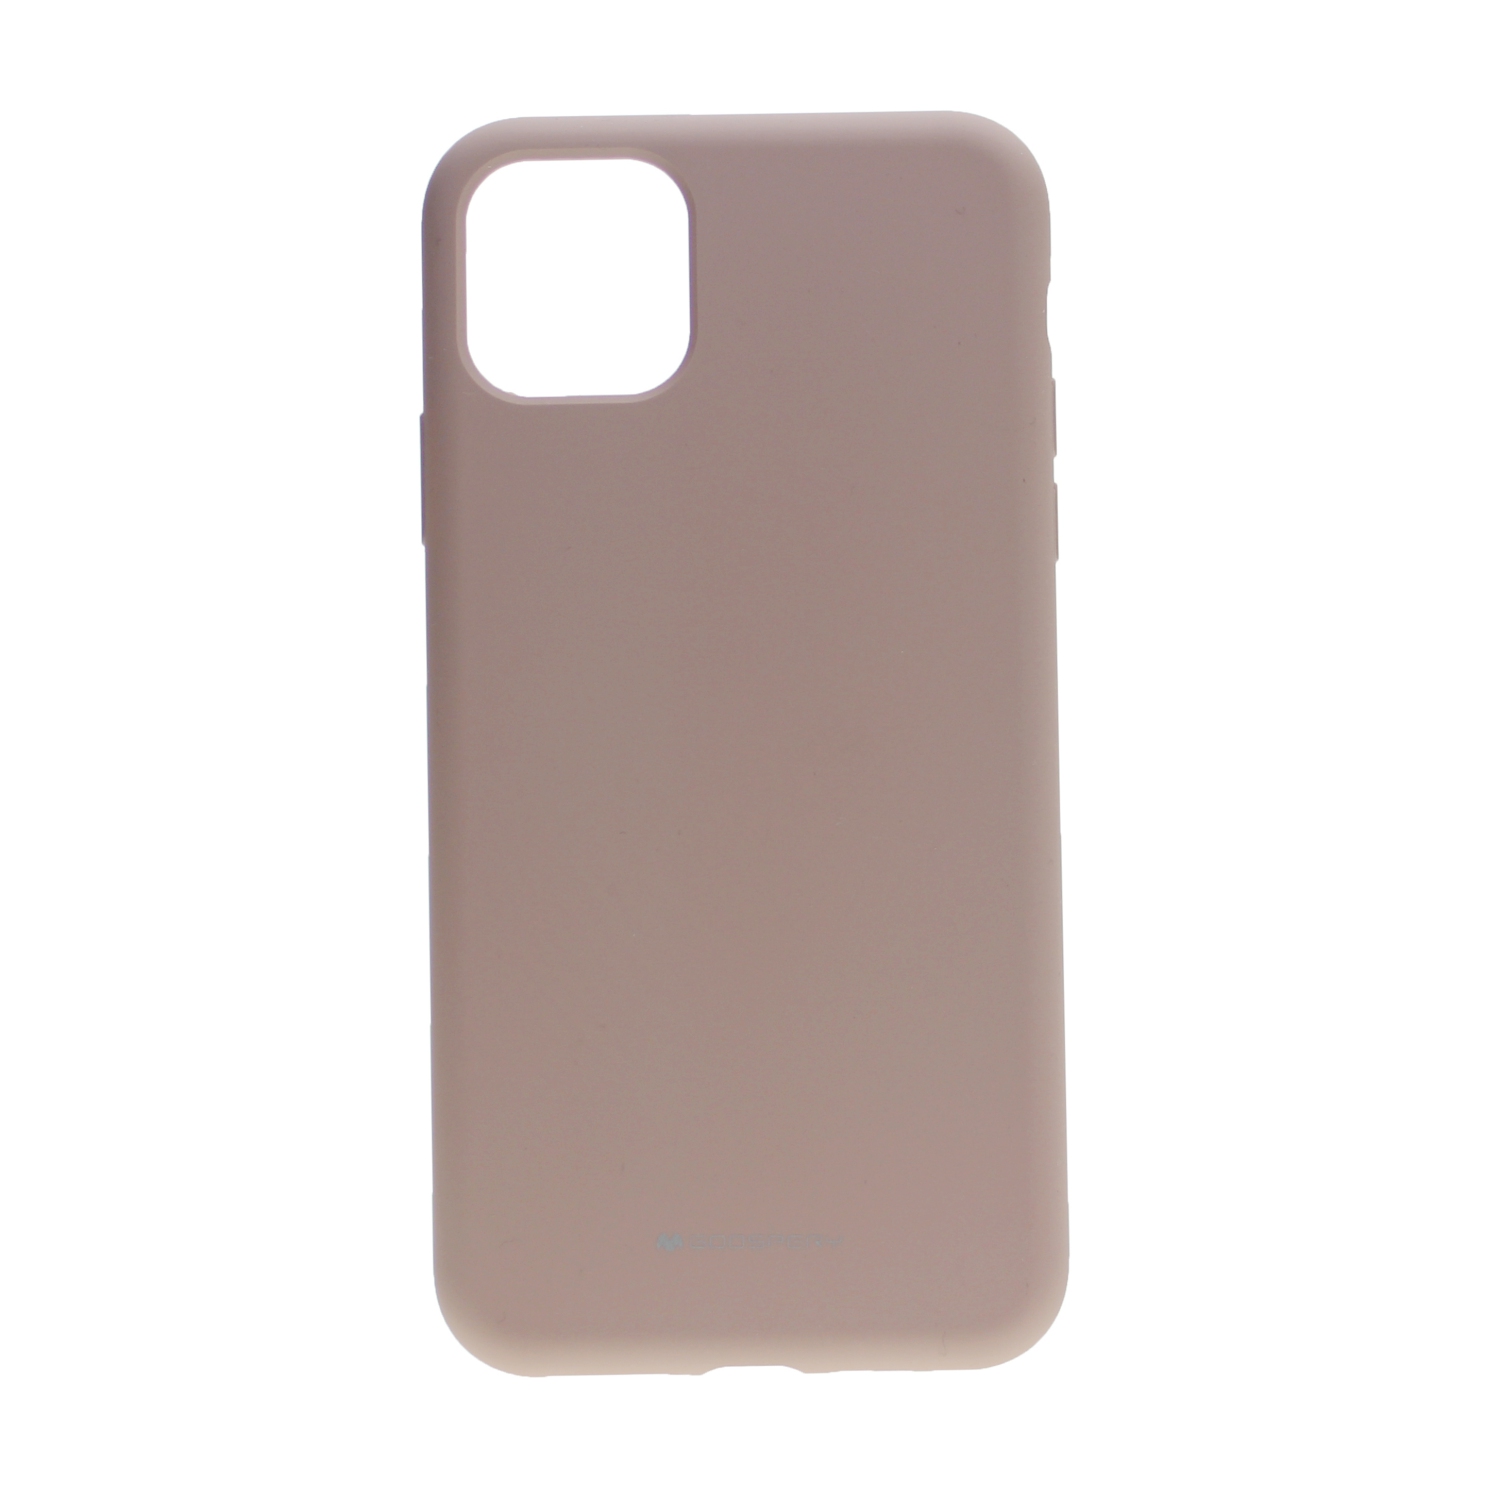 TopSave Goospery Silicone Case For Iphone 12 Mini, Pink Sand